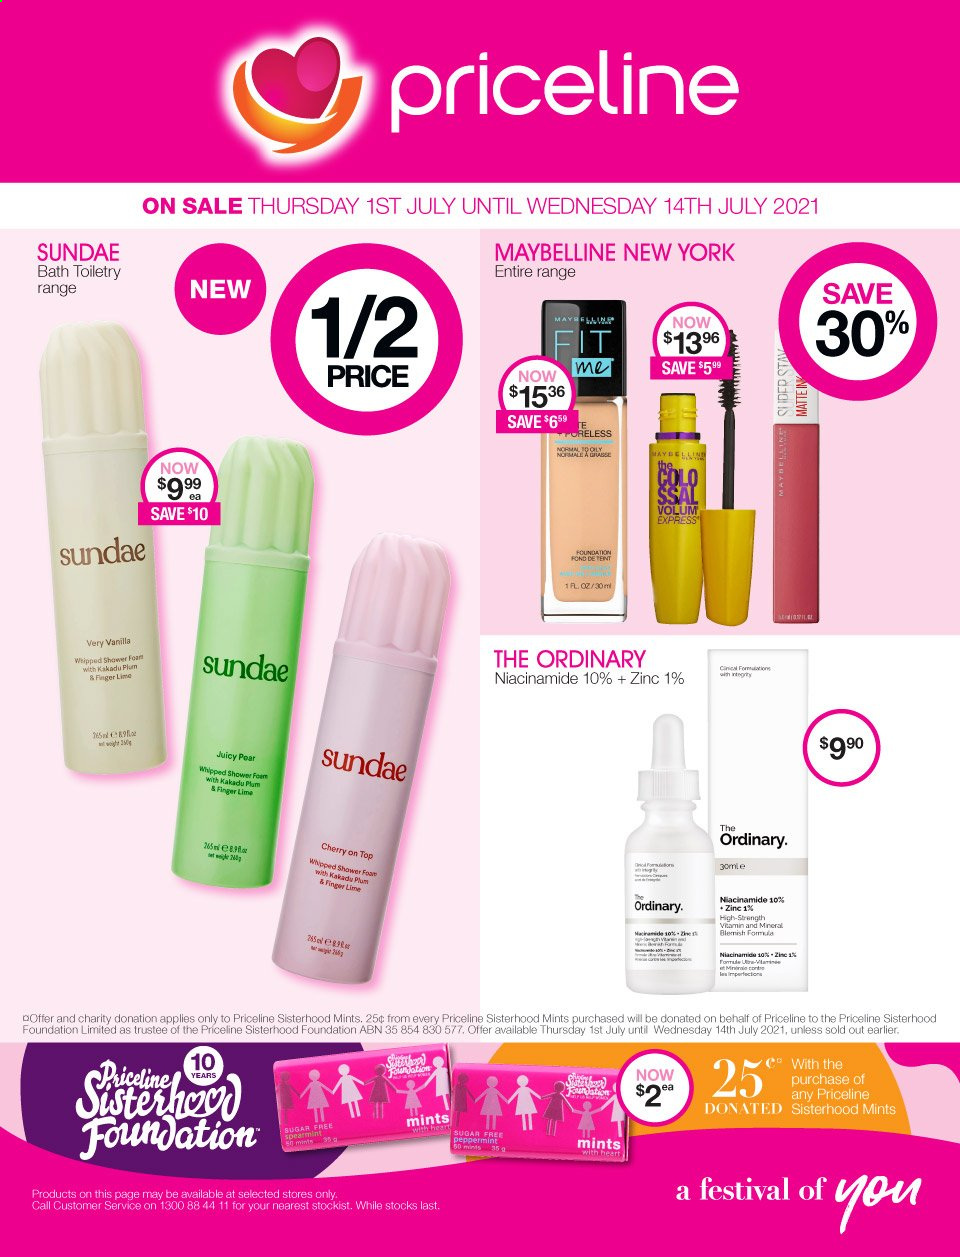 thumbnail - Priceline Pharmacy Catalogue - 1 Jul 2021 - 14 Jul 2021 - Sales products - The Ordinary, Niacinamide, Maybelline, zinc. Page 1.